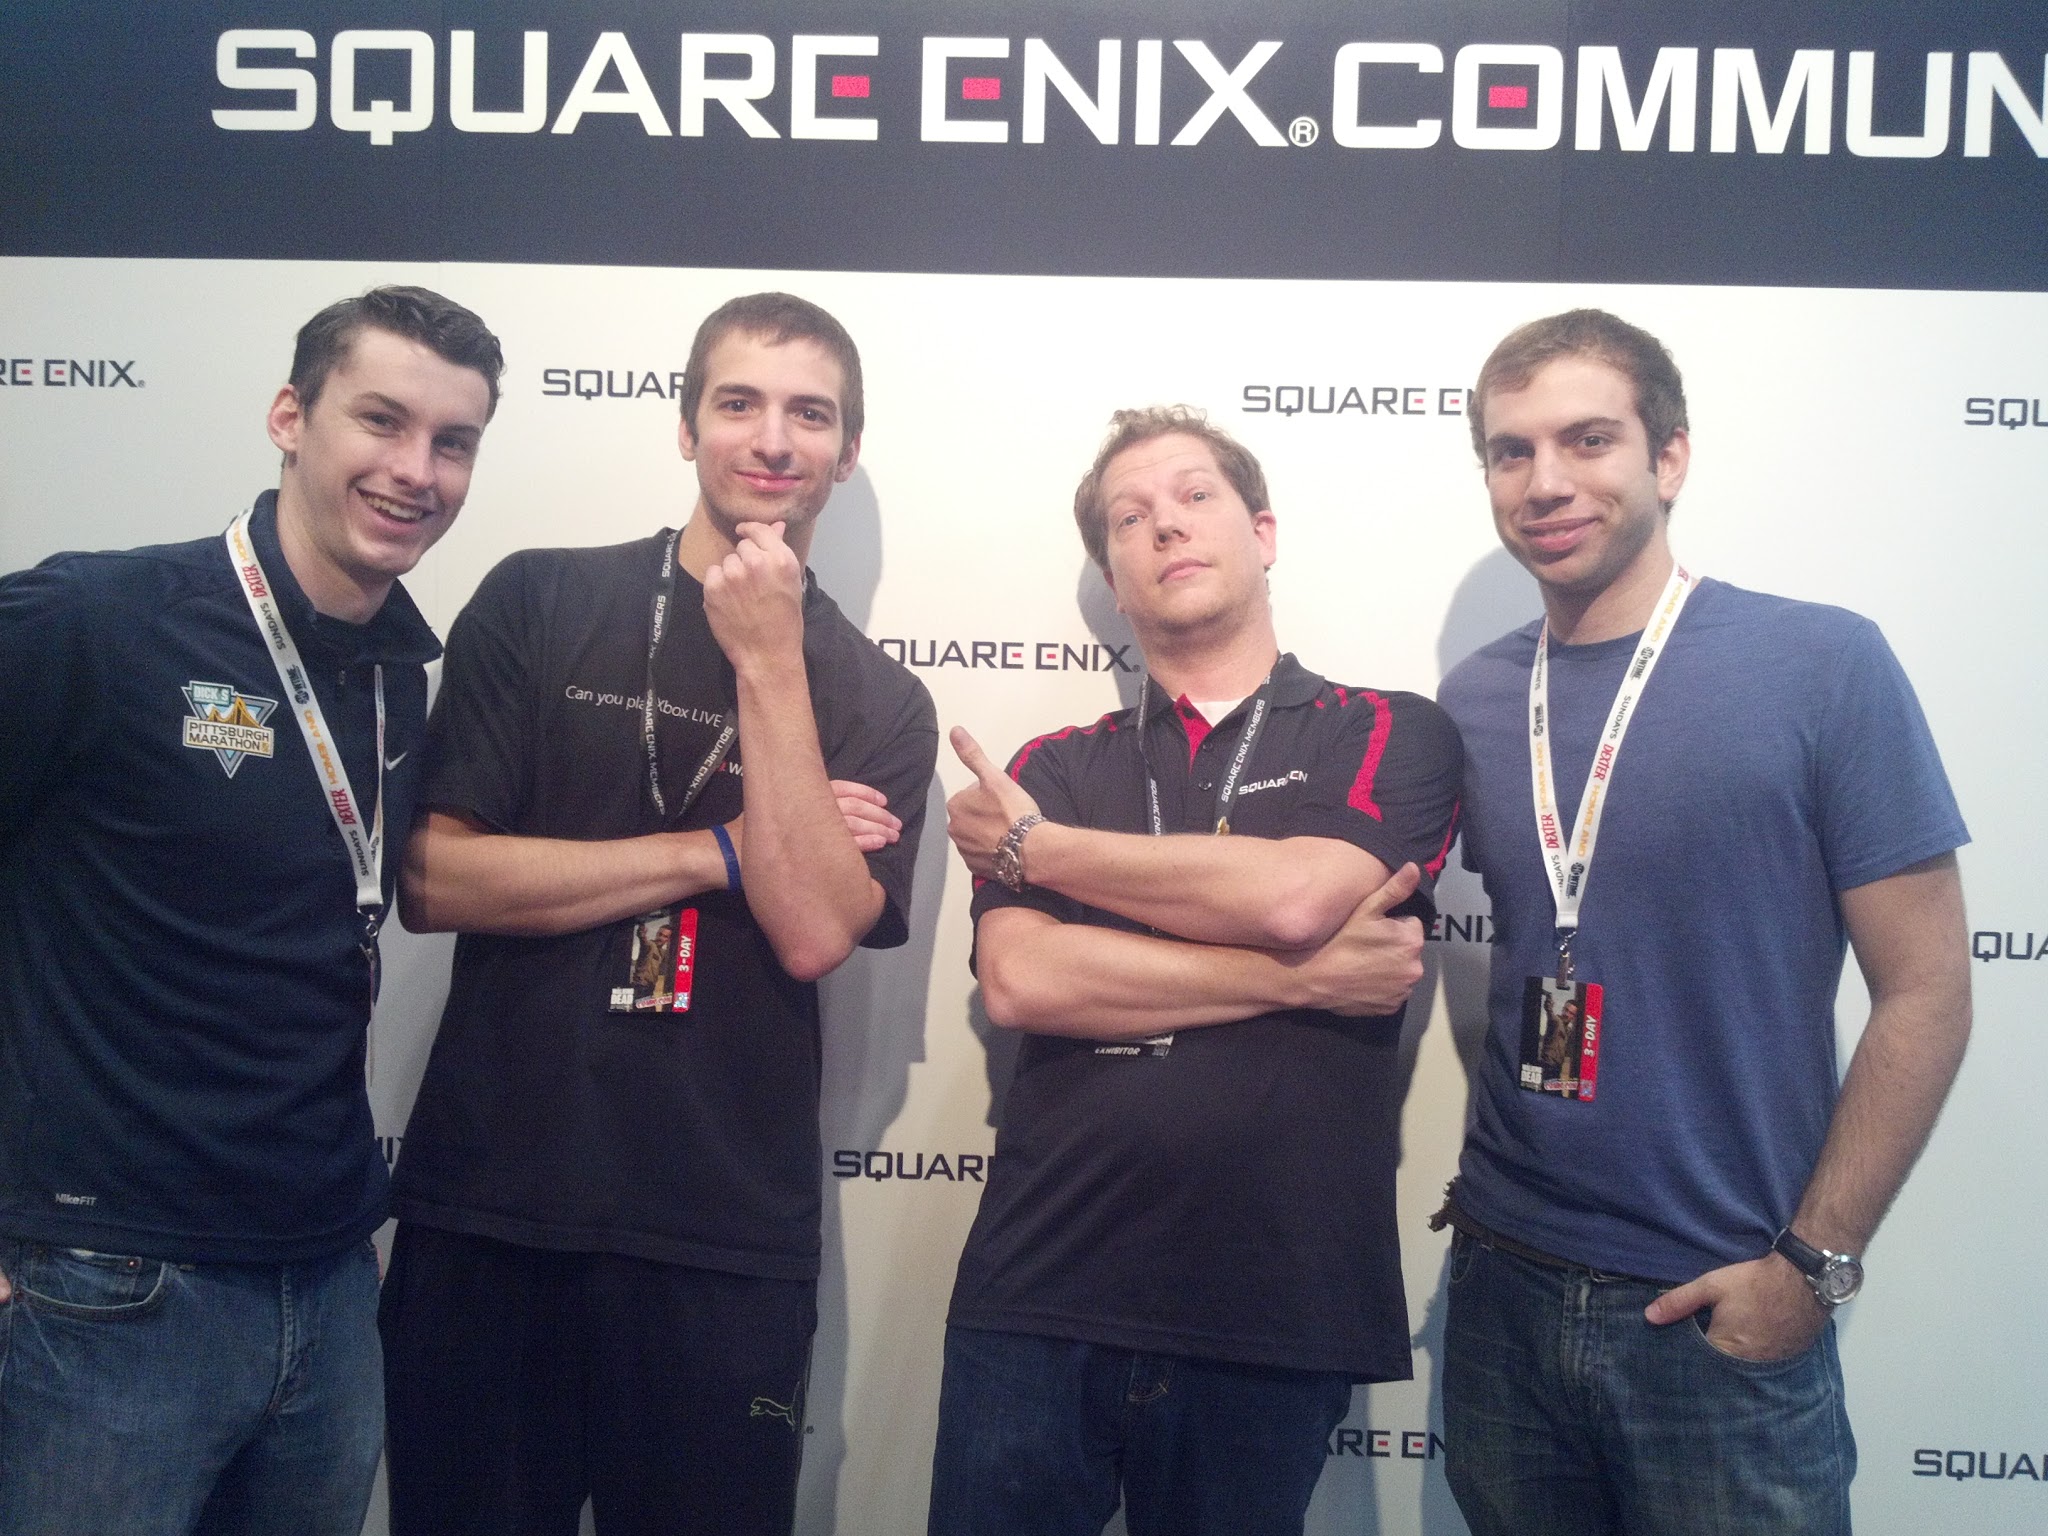 VGL with Robert Peeler, Community Manager for Square Enix